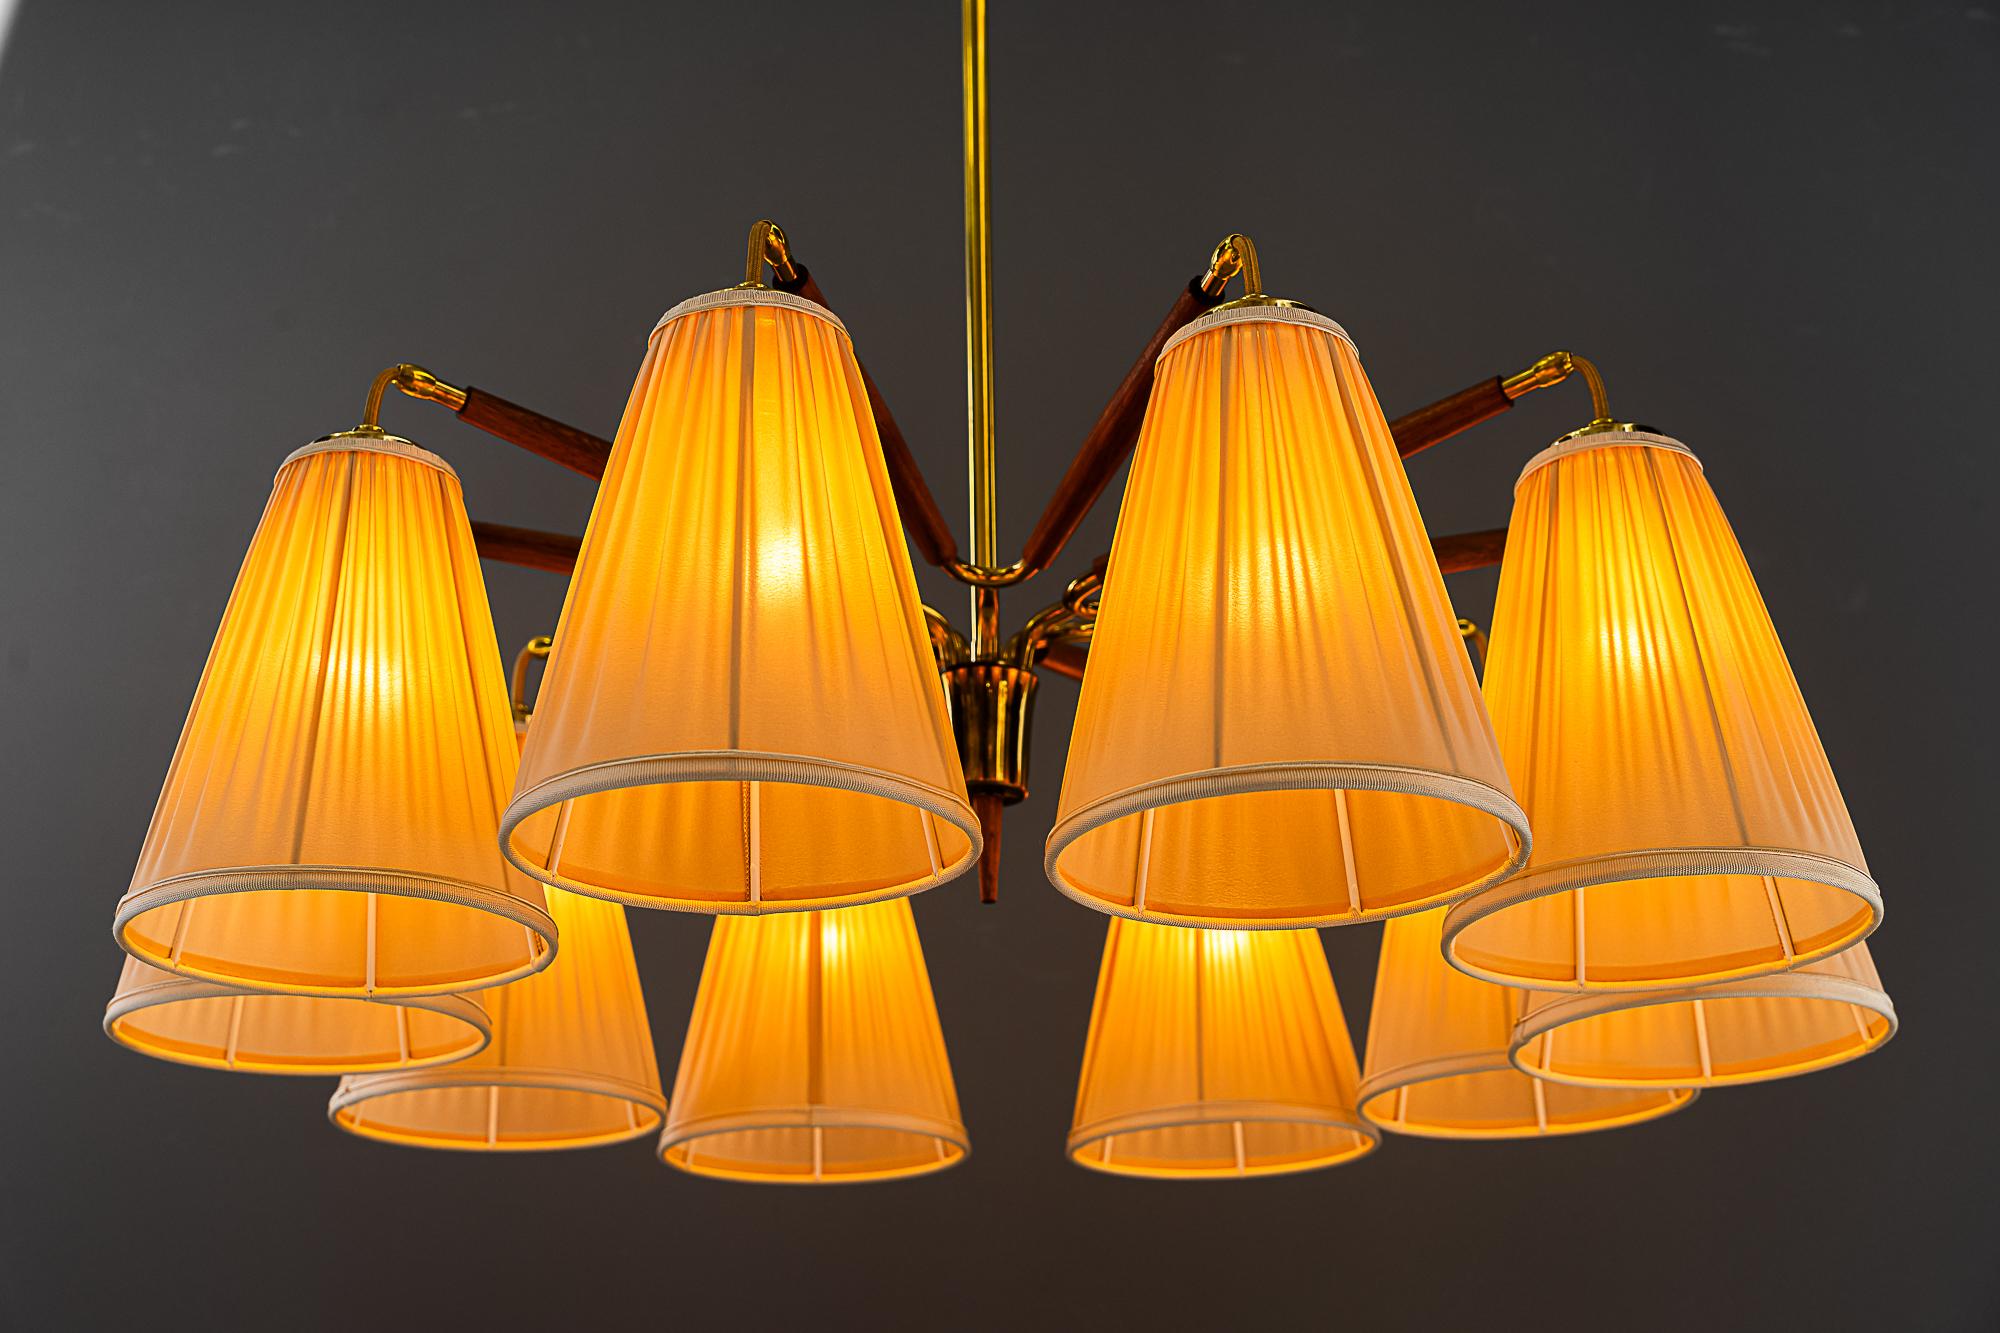 Polished Two Rupert nikoll 10 Arm chandeliers vienna around 1950s For Sale